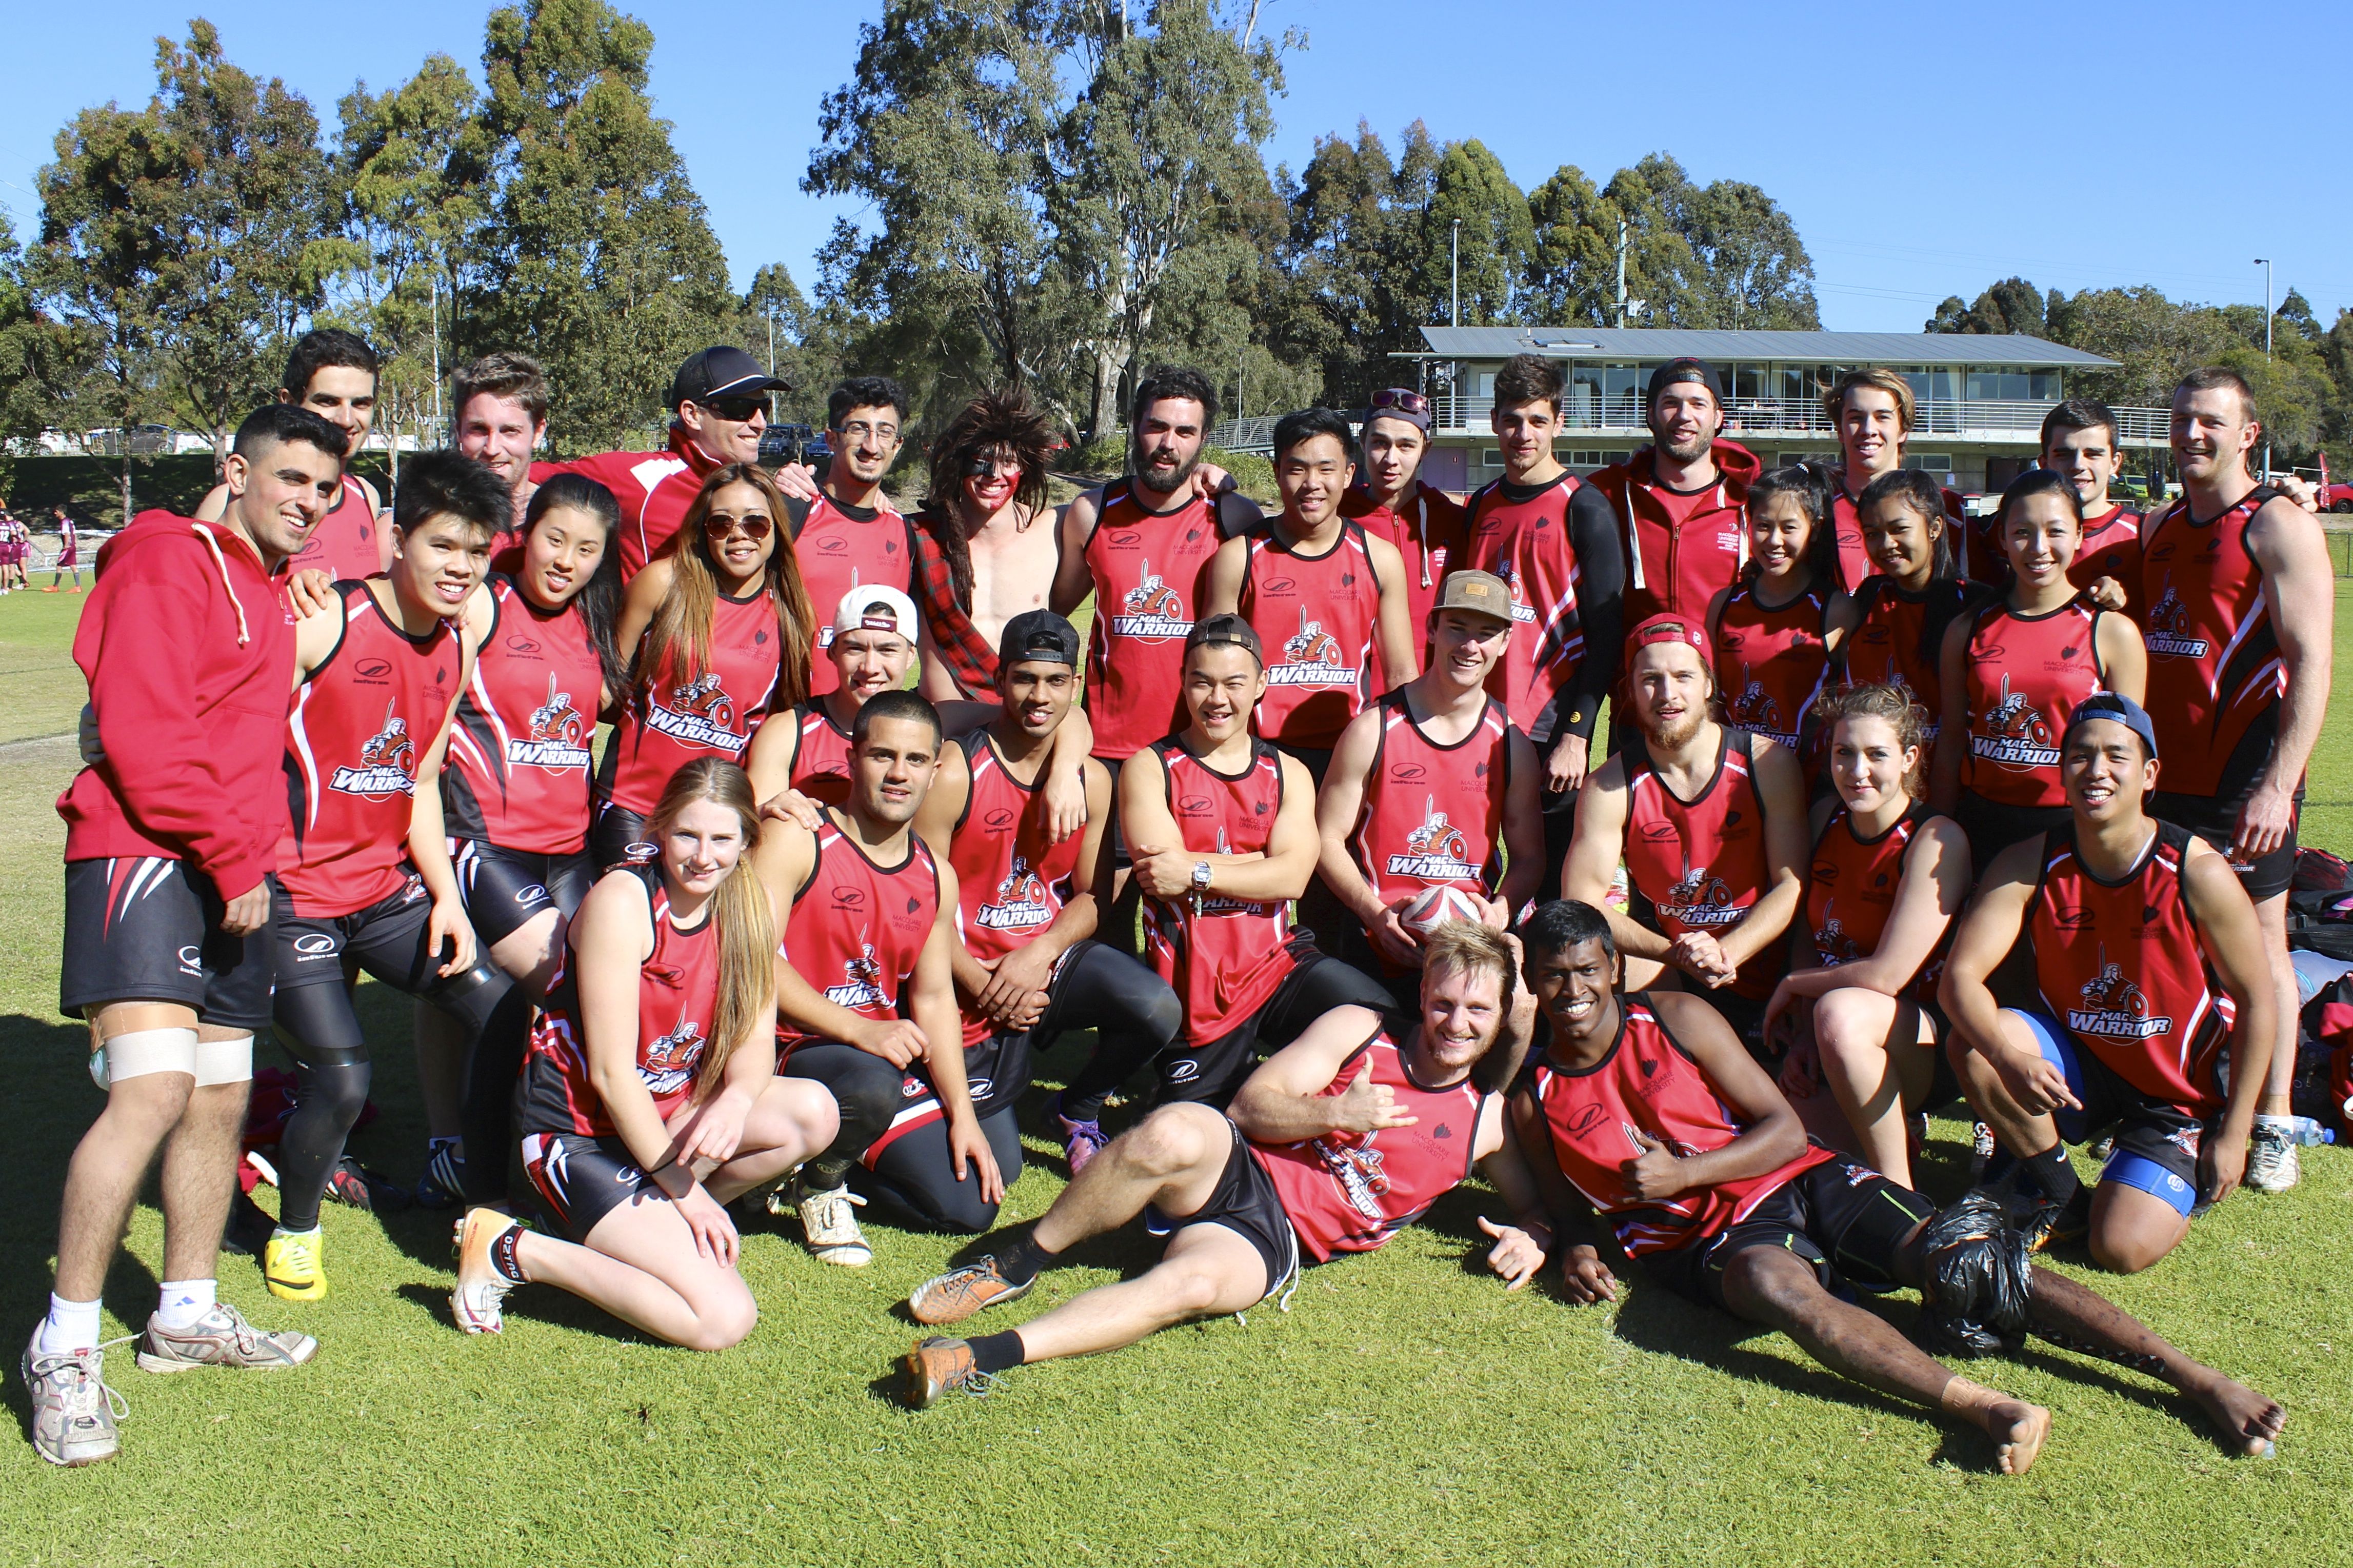 Macquarie University's Oztag teams won bronze and silver at the Eastern University Games.